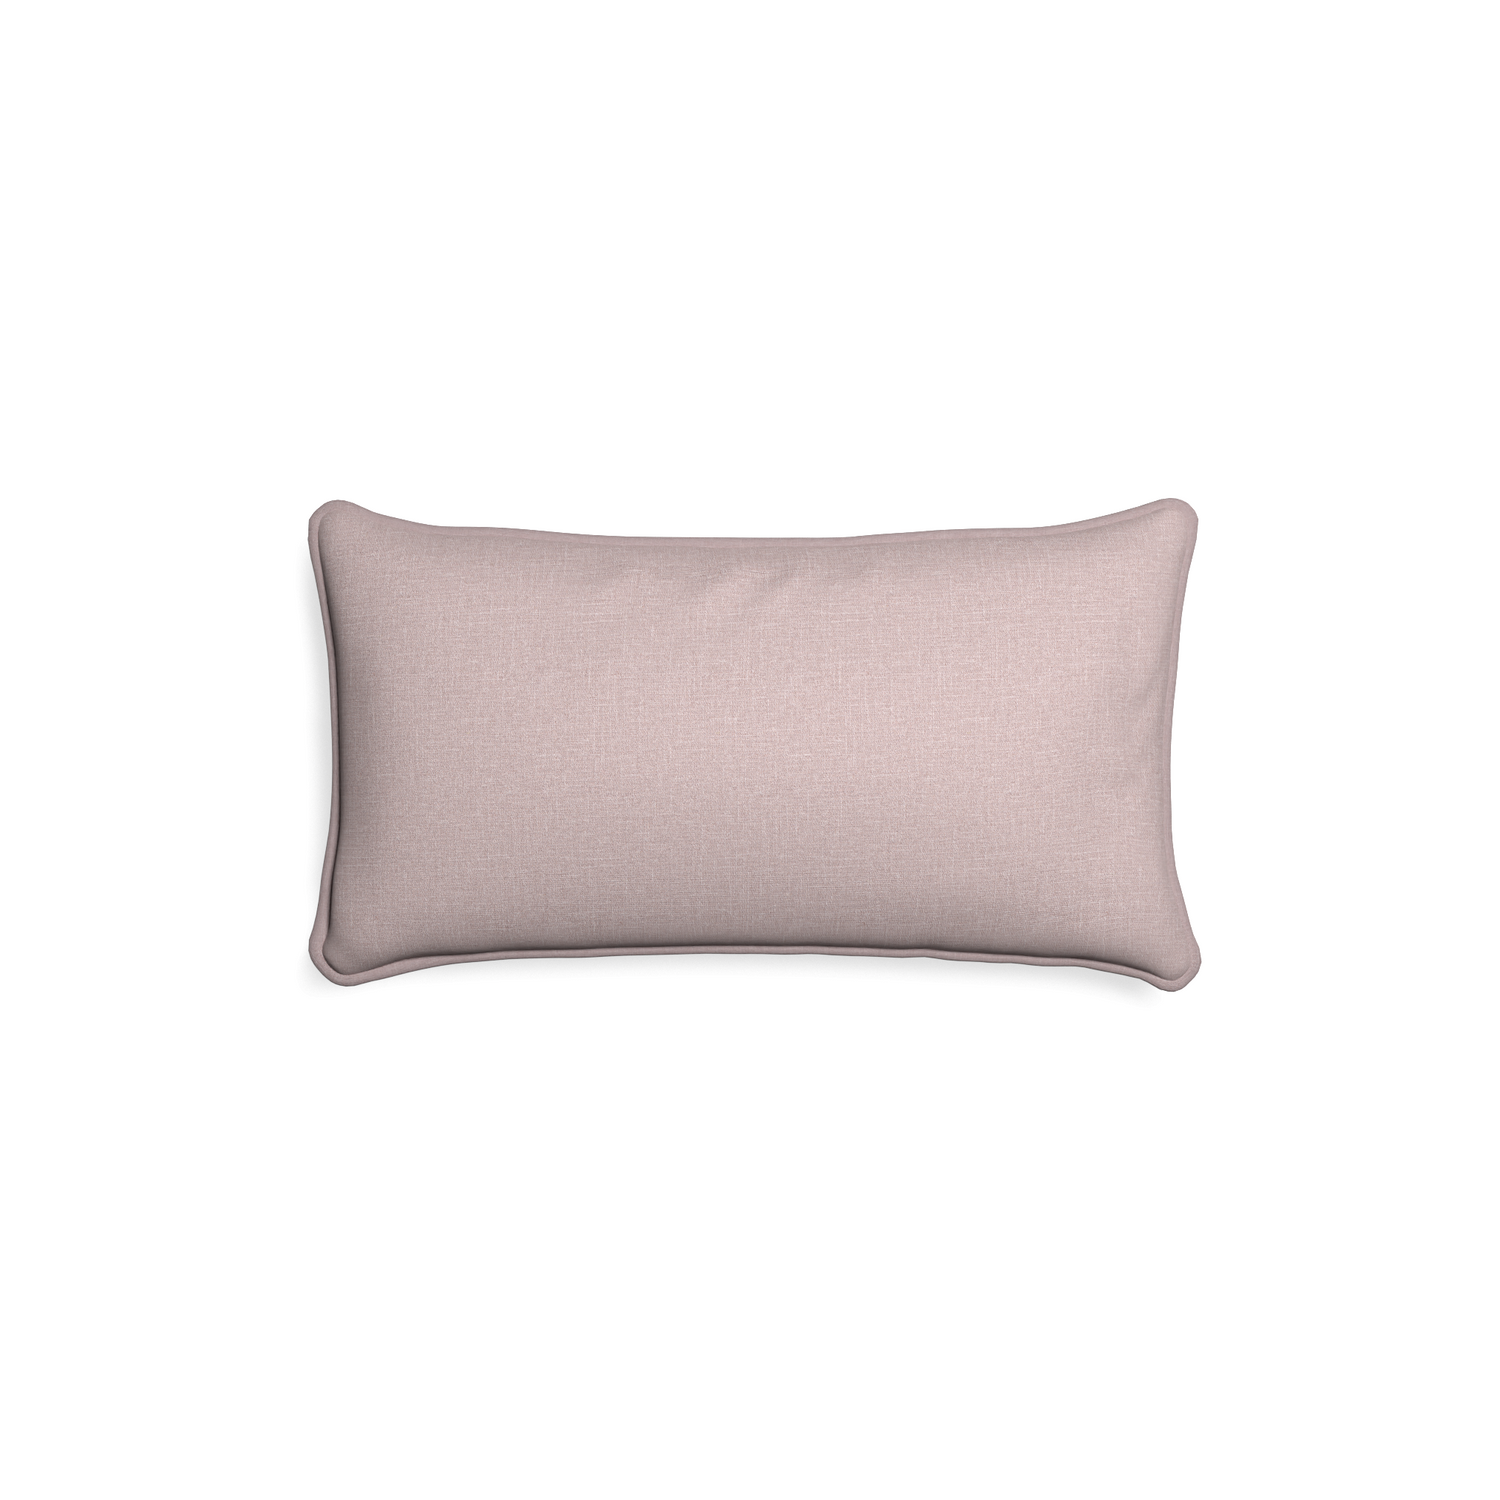 Petite-lumbar orchid custom mauve pinkpillow with orchid piping on white background